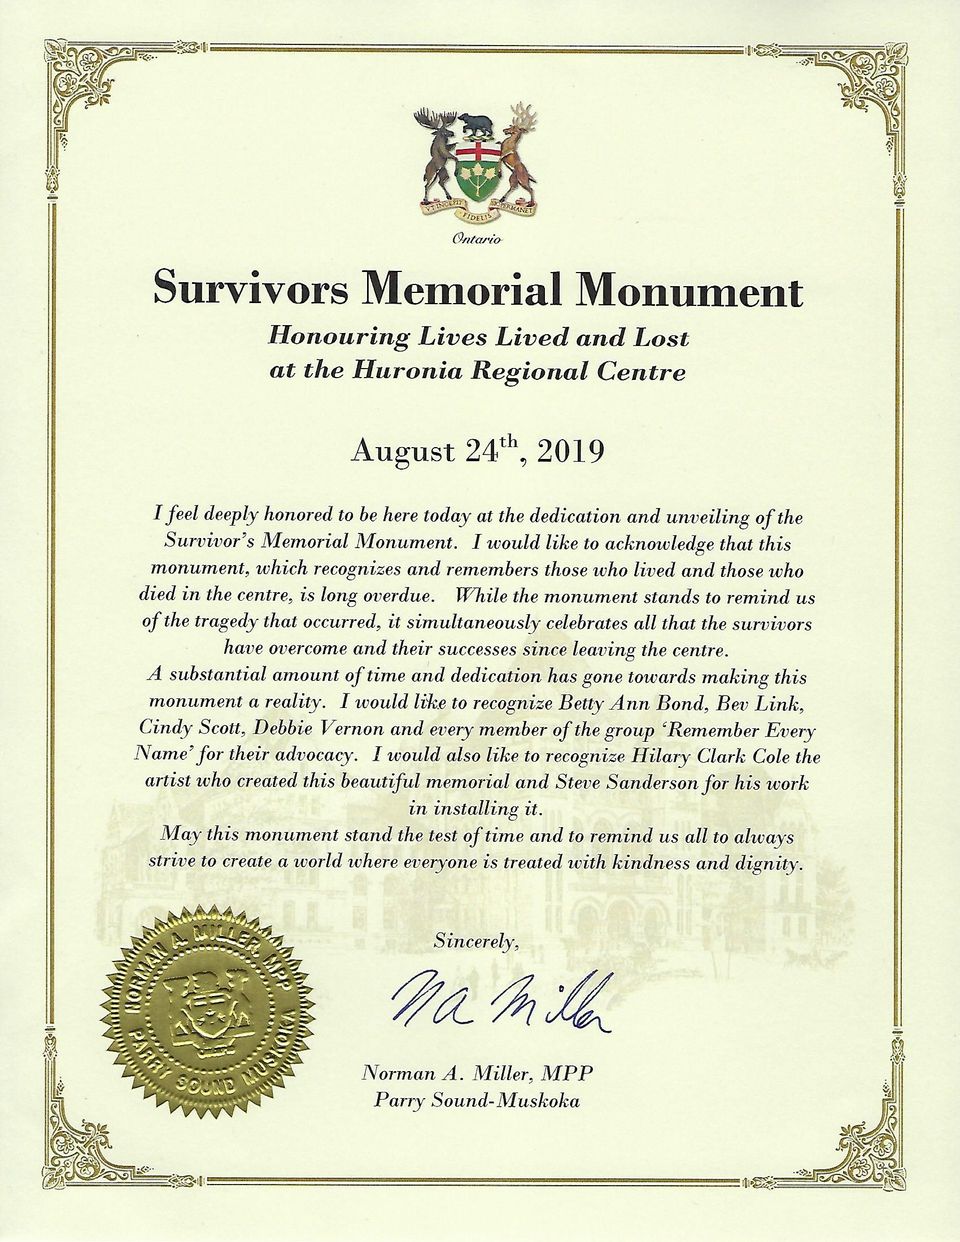 Tribute from Norm Miller, MPP